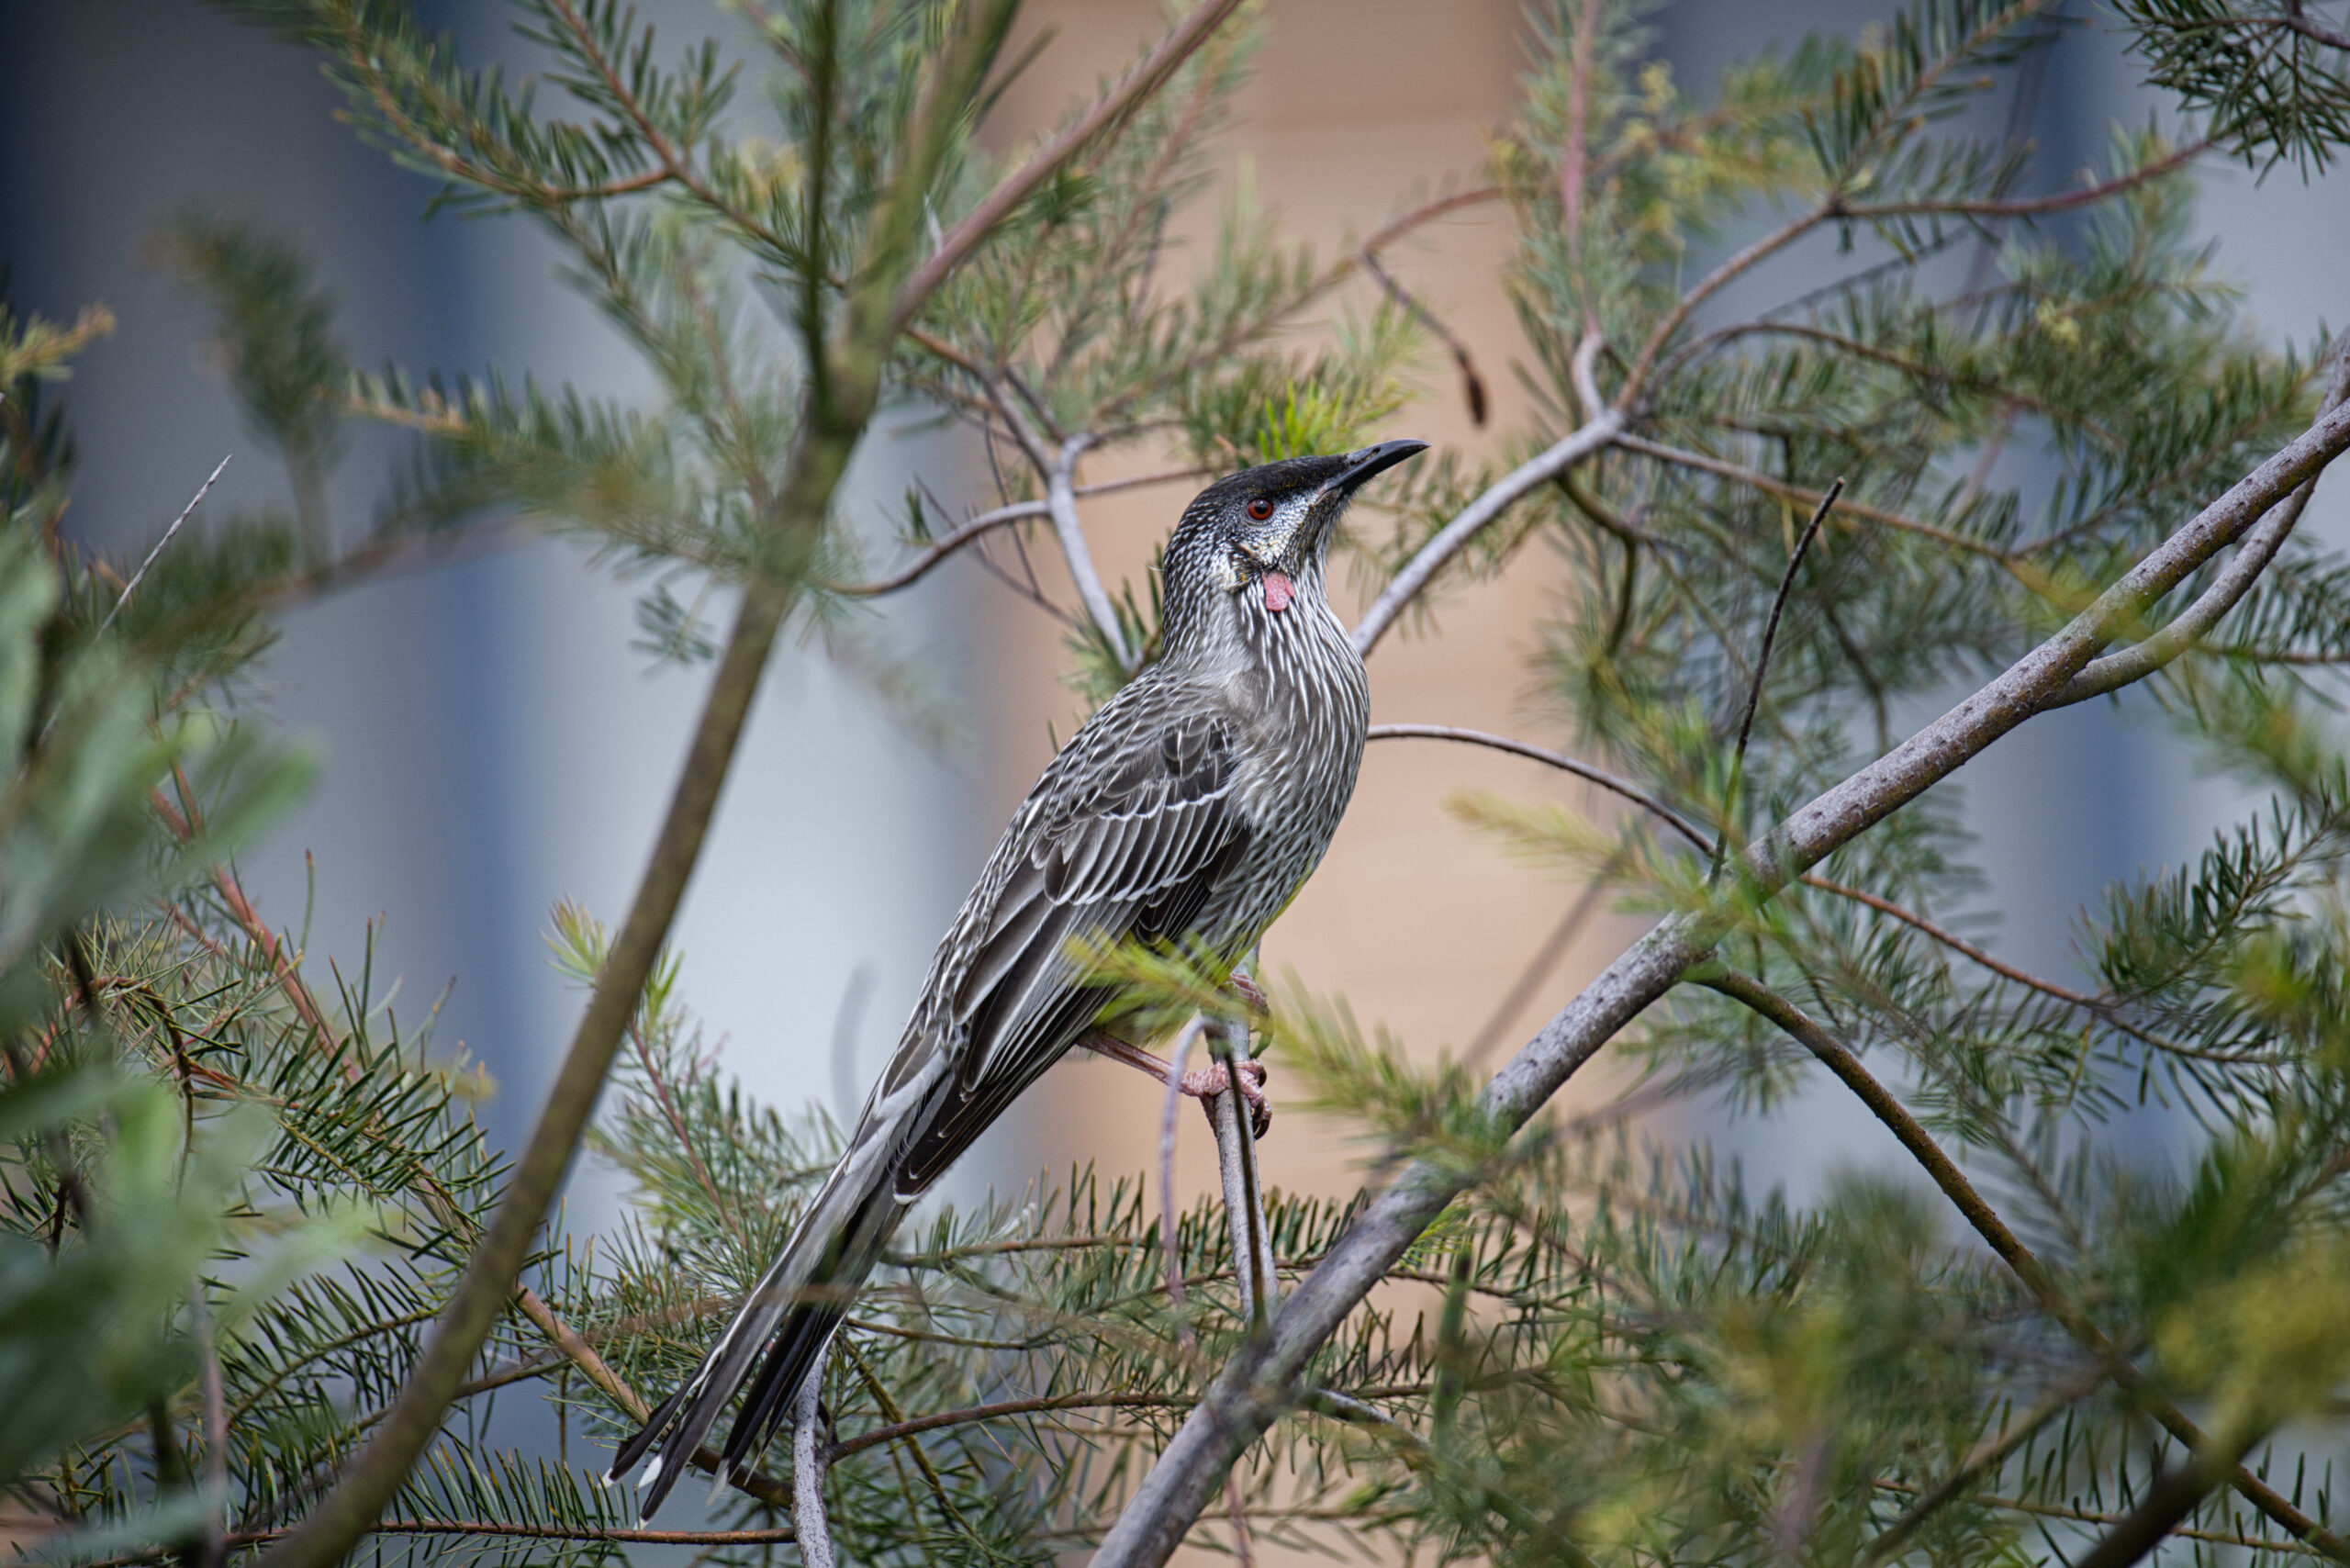 A photo of a red wattlebird sitting in a shrub. This bird is dark brown and cream in colour. It has a long, slender tail, a round body, and a small head with a longer, pointy beak. It has a small patch of red just below its cheek.